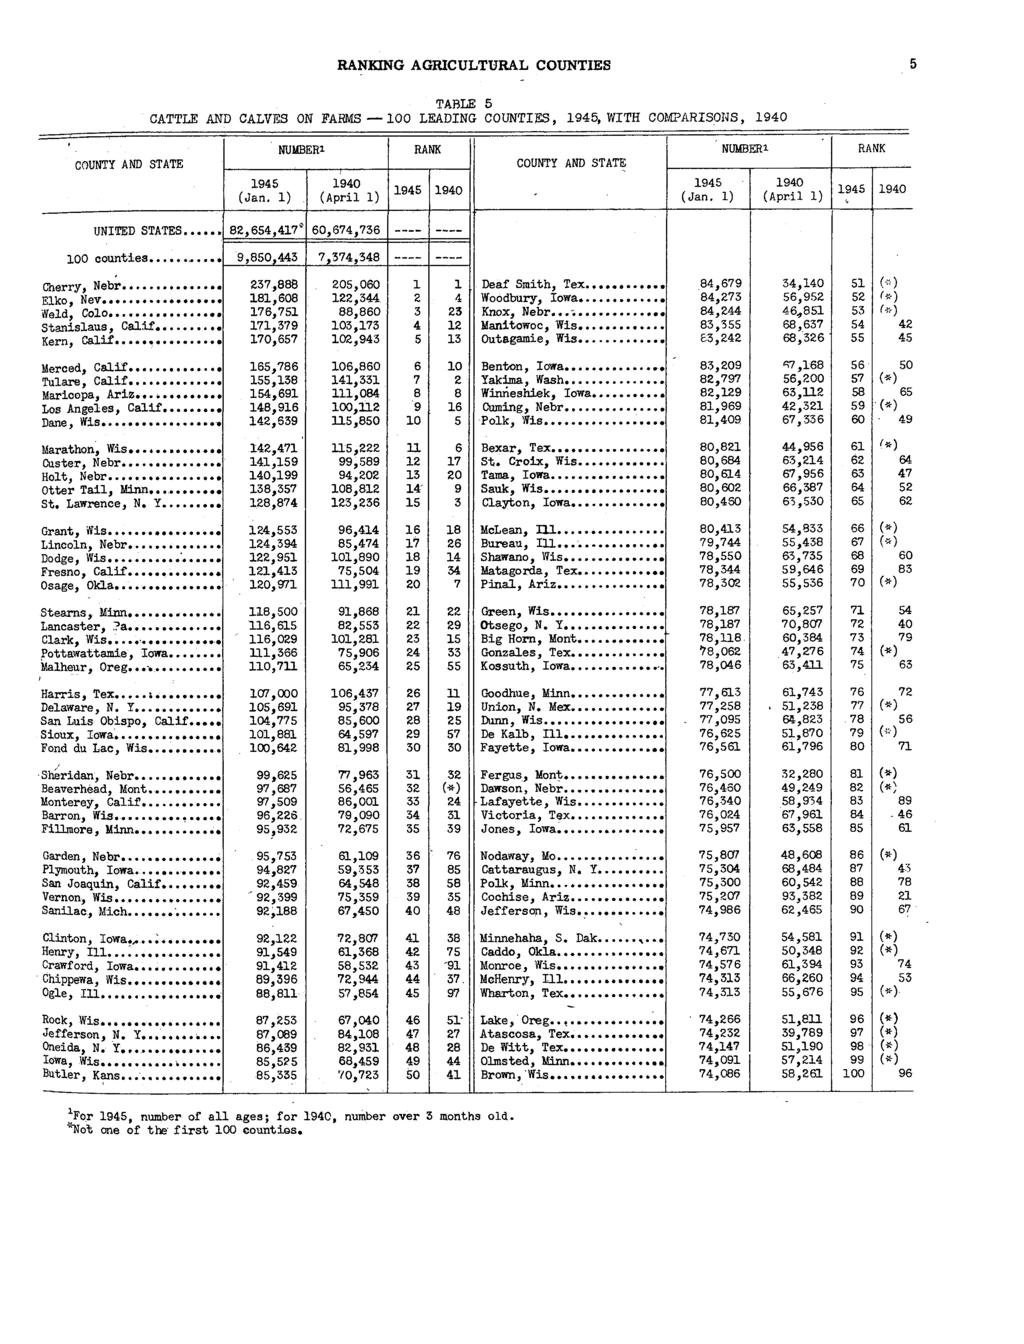 ING AGRICULTURAL COUNTIES 5 TABLE 5 CATTLE AND CALVES ON FARMS 100 LEADING COUNTIES, 1945, WITH COMPARISONS, 1940 1945 (Jan. 1) NUMBERl 1940 (April 1) 1945 1940 1945 (Jan.